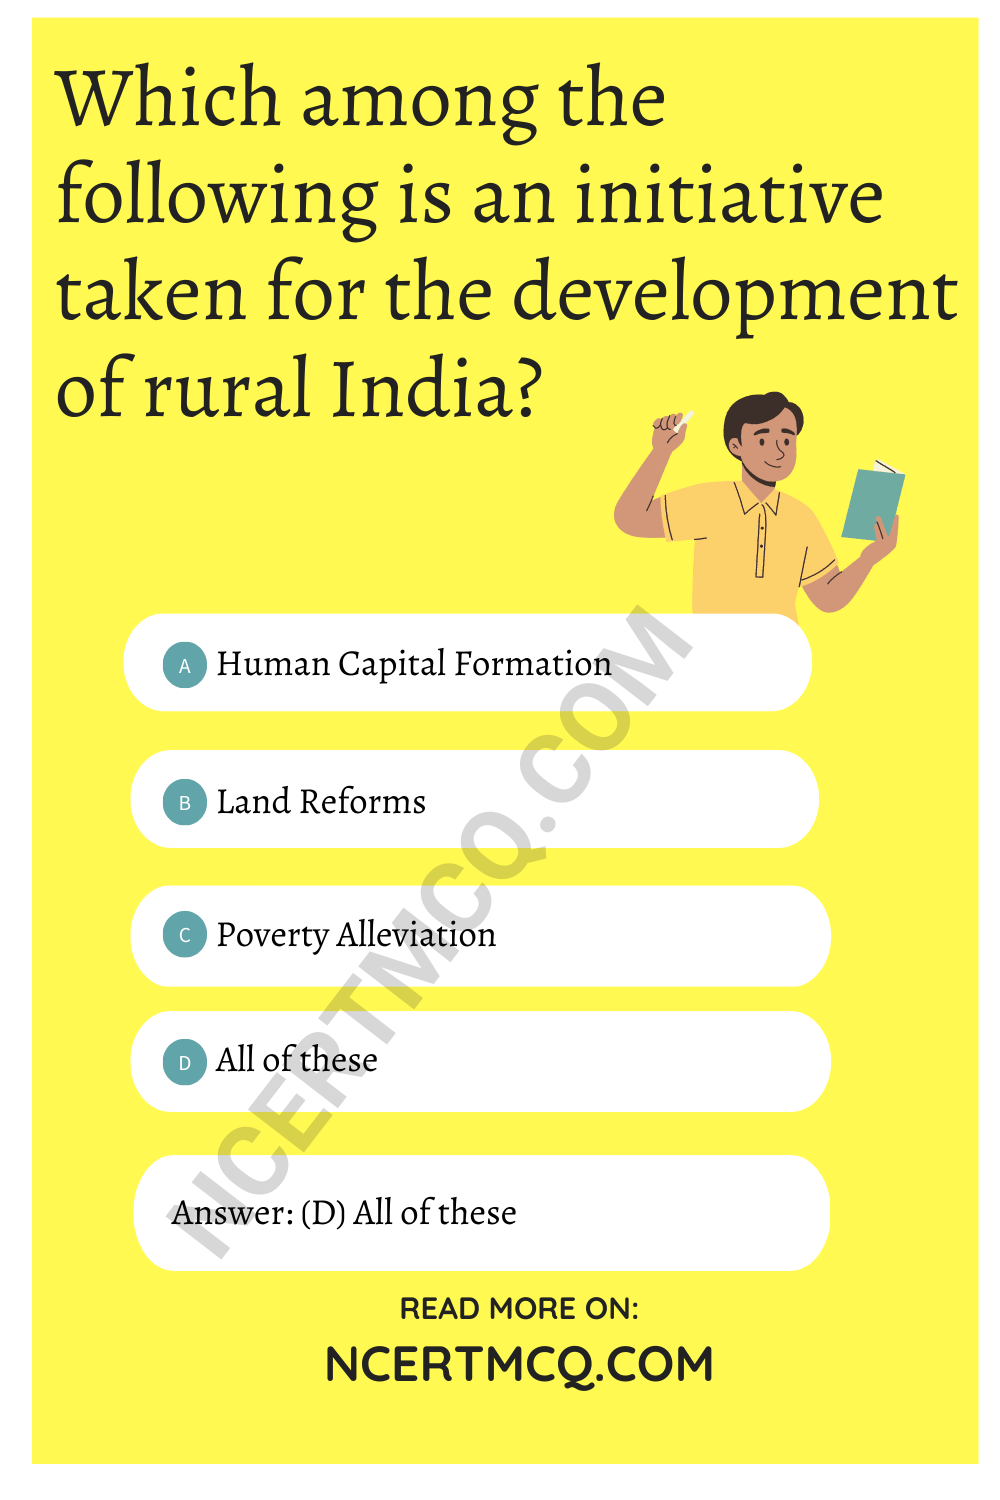 Which among the following is an initiative taken for the development of rural India?